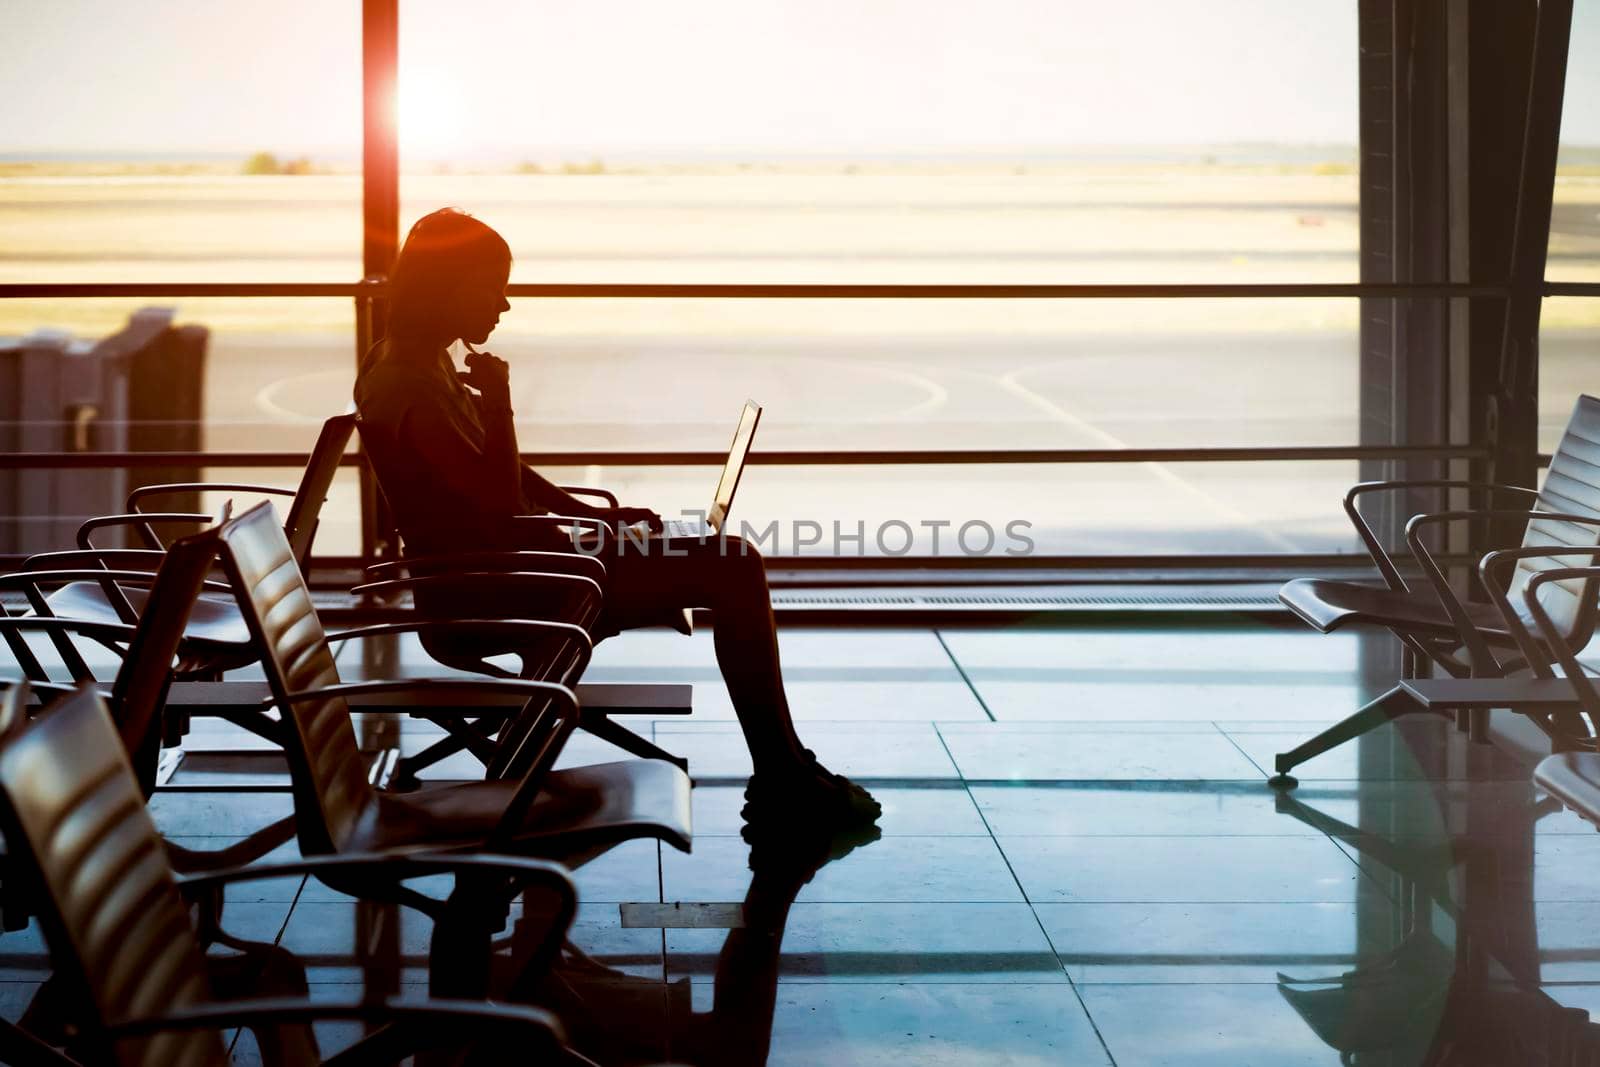 A young girl works on a laptop at the airport while she waits to board a plane. A woman buys tickets, studies and communicates via the Internet, the airport in the background.